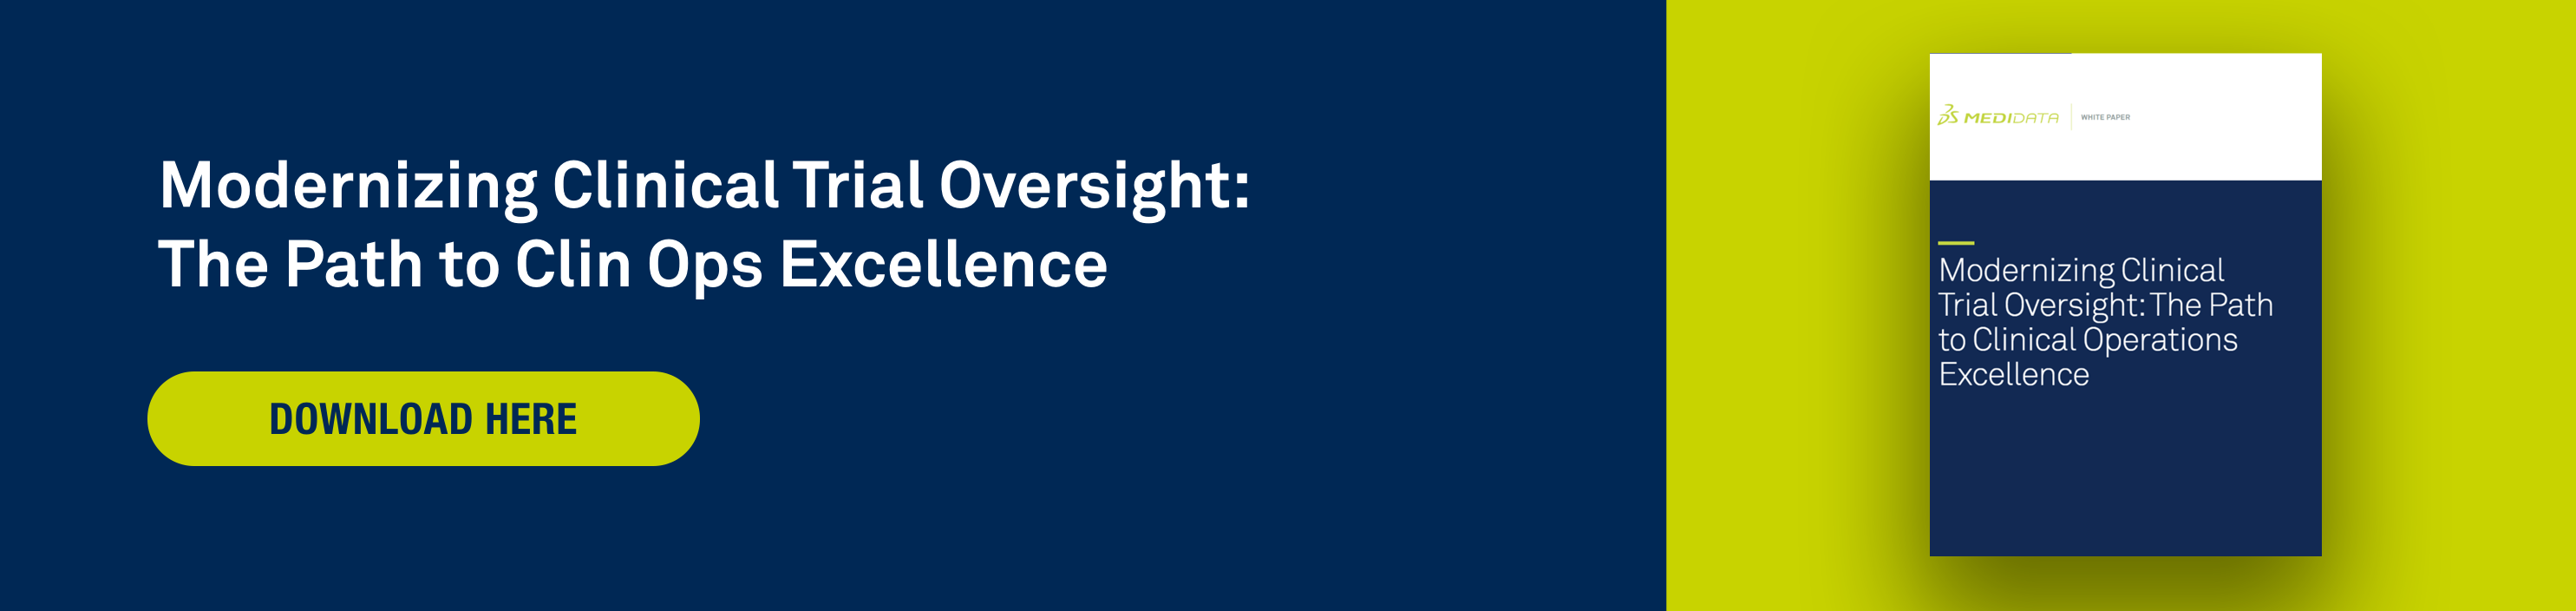 Modernizing Clinical Trial Oversight White Paper